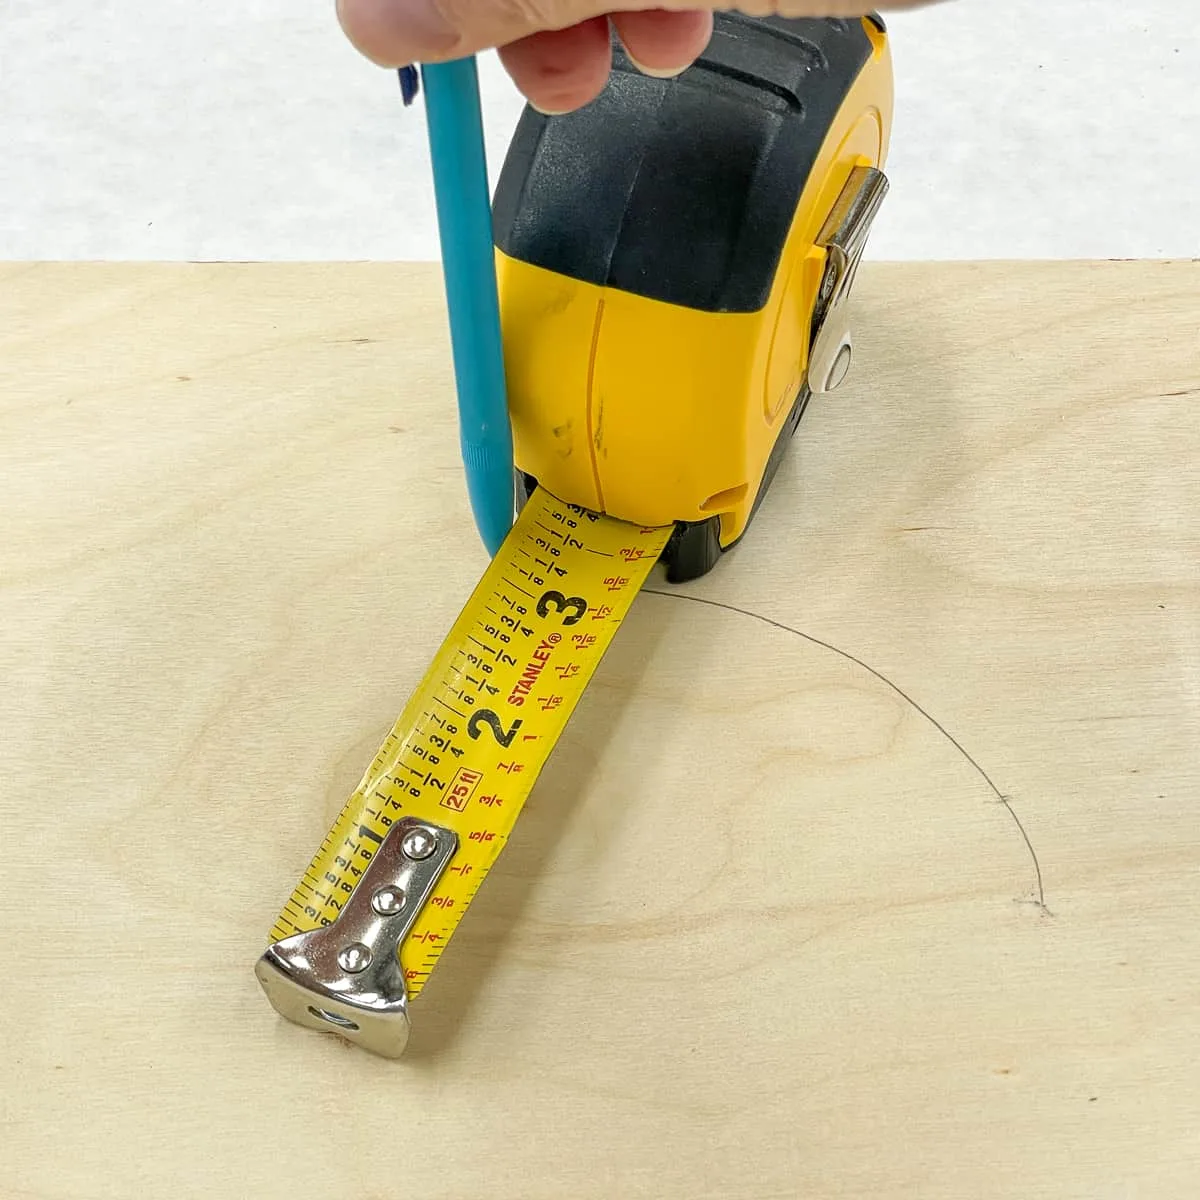 drawing a circle with a tape measure and a nail